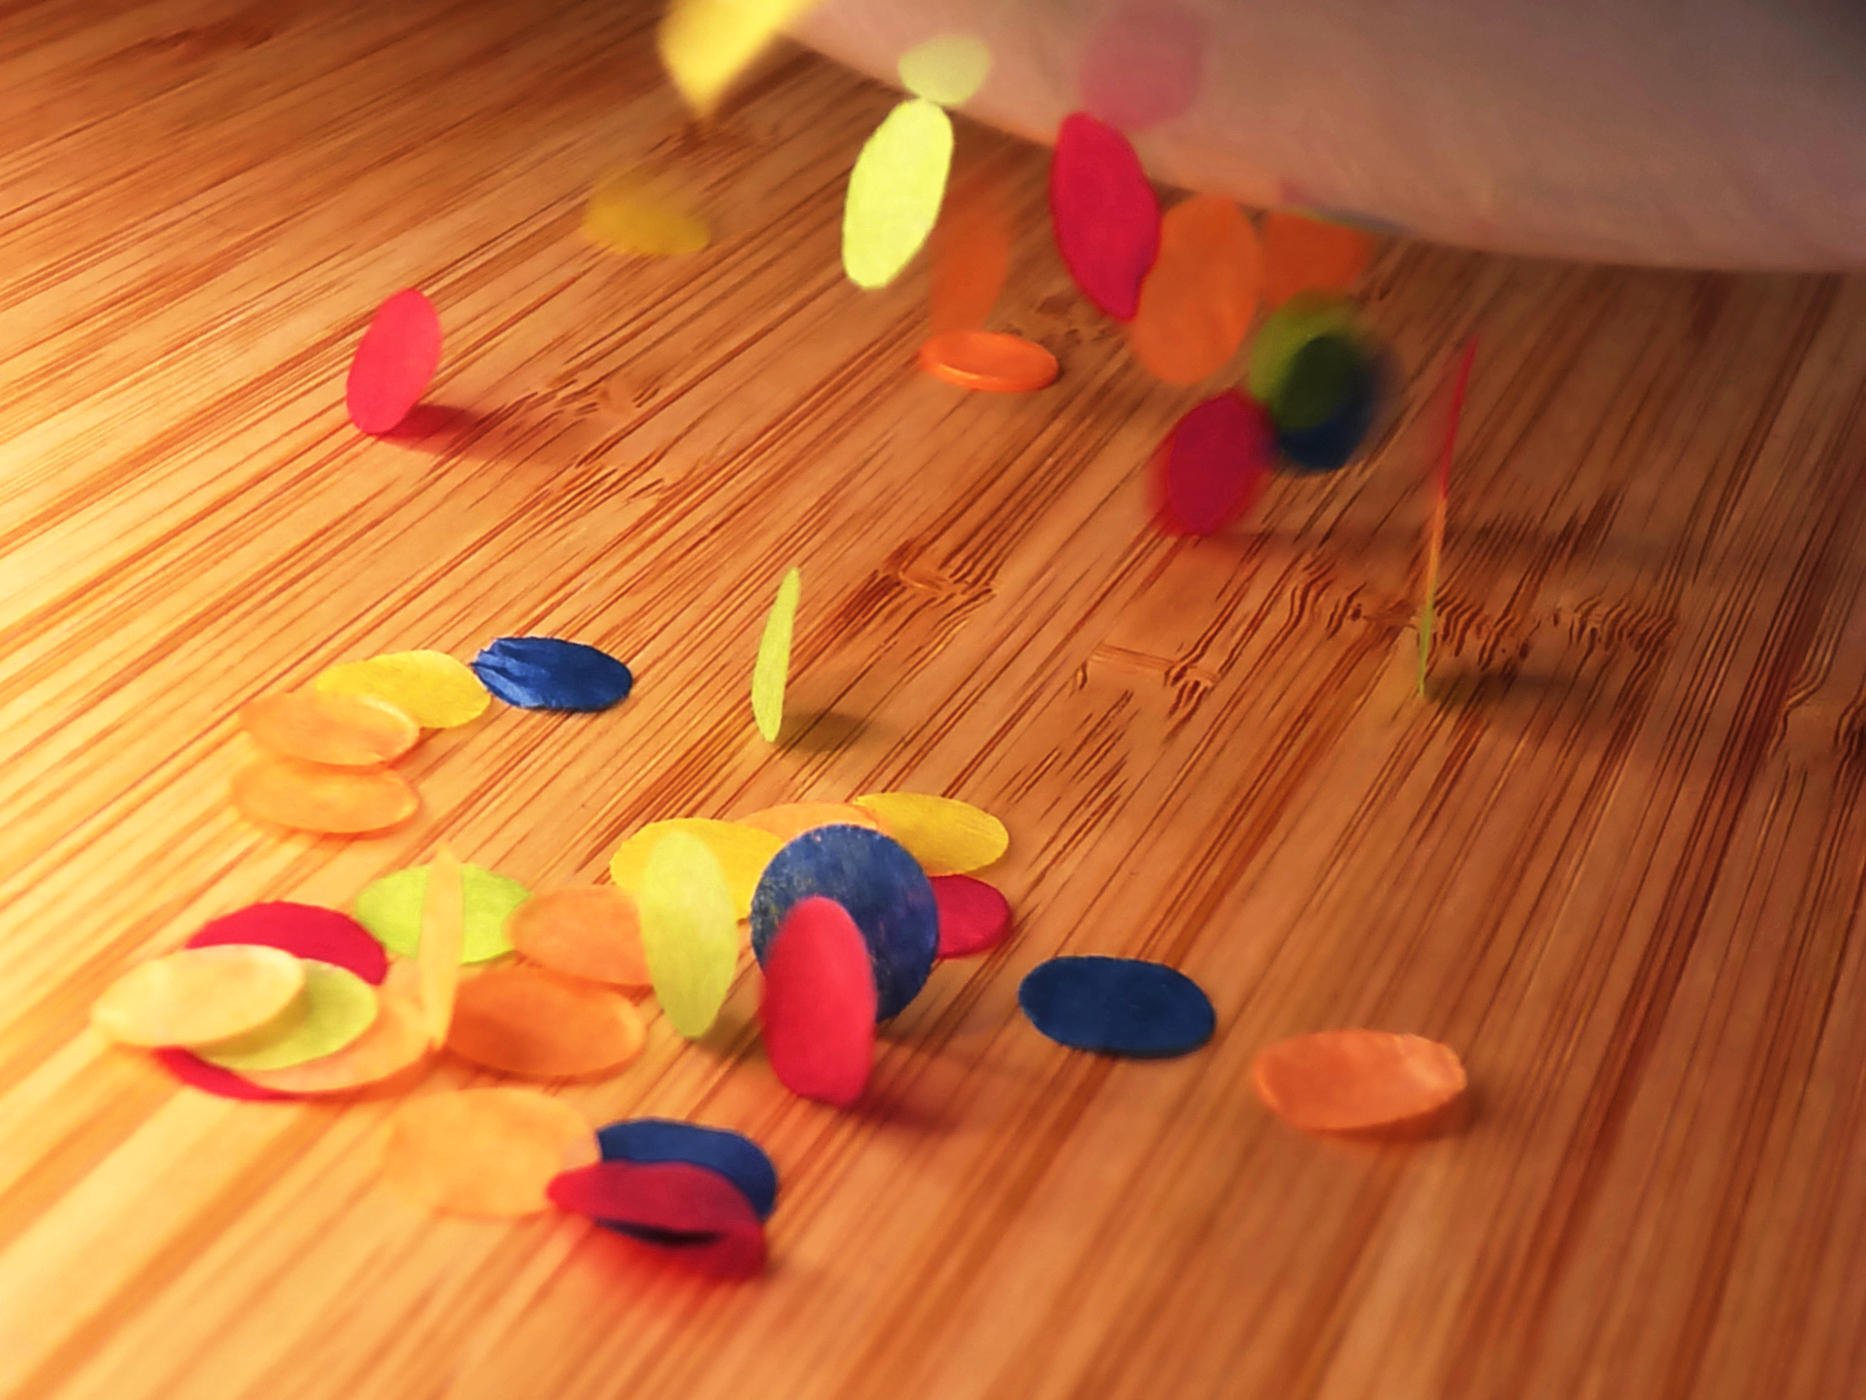 Electrostatic attraction between a charged up balloon and confetti